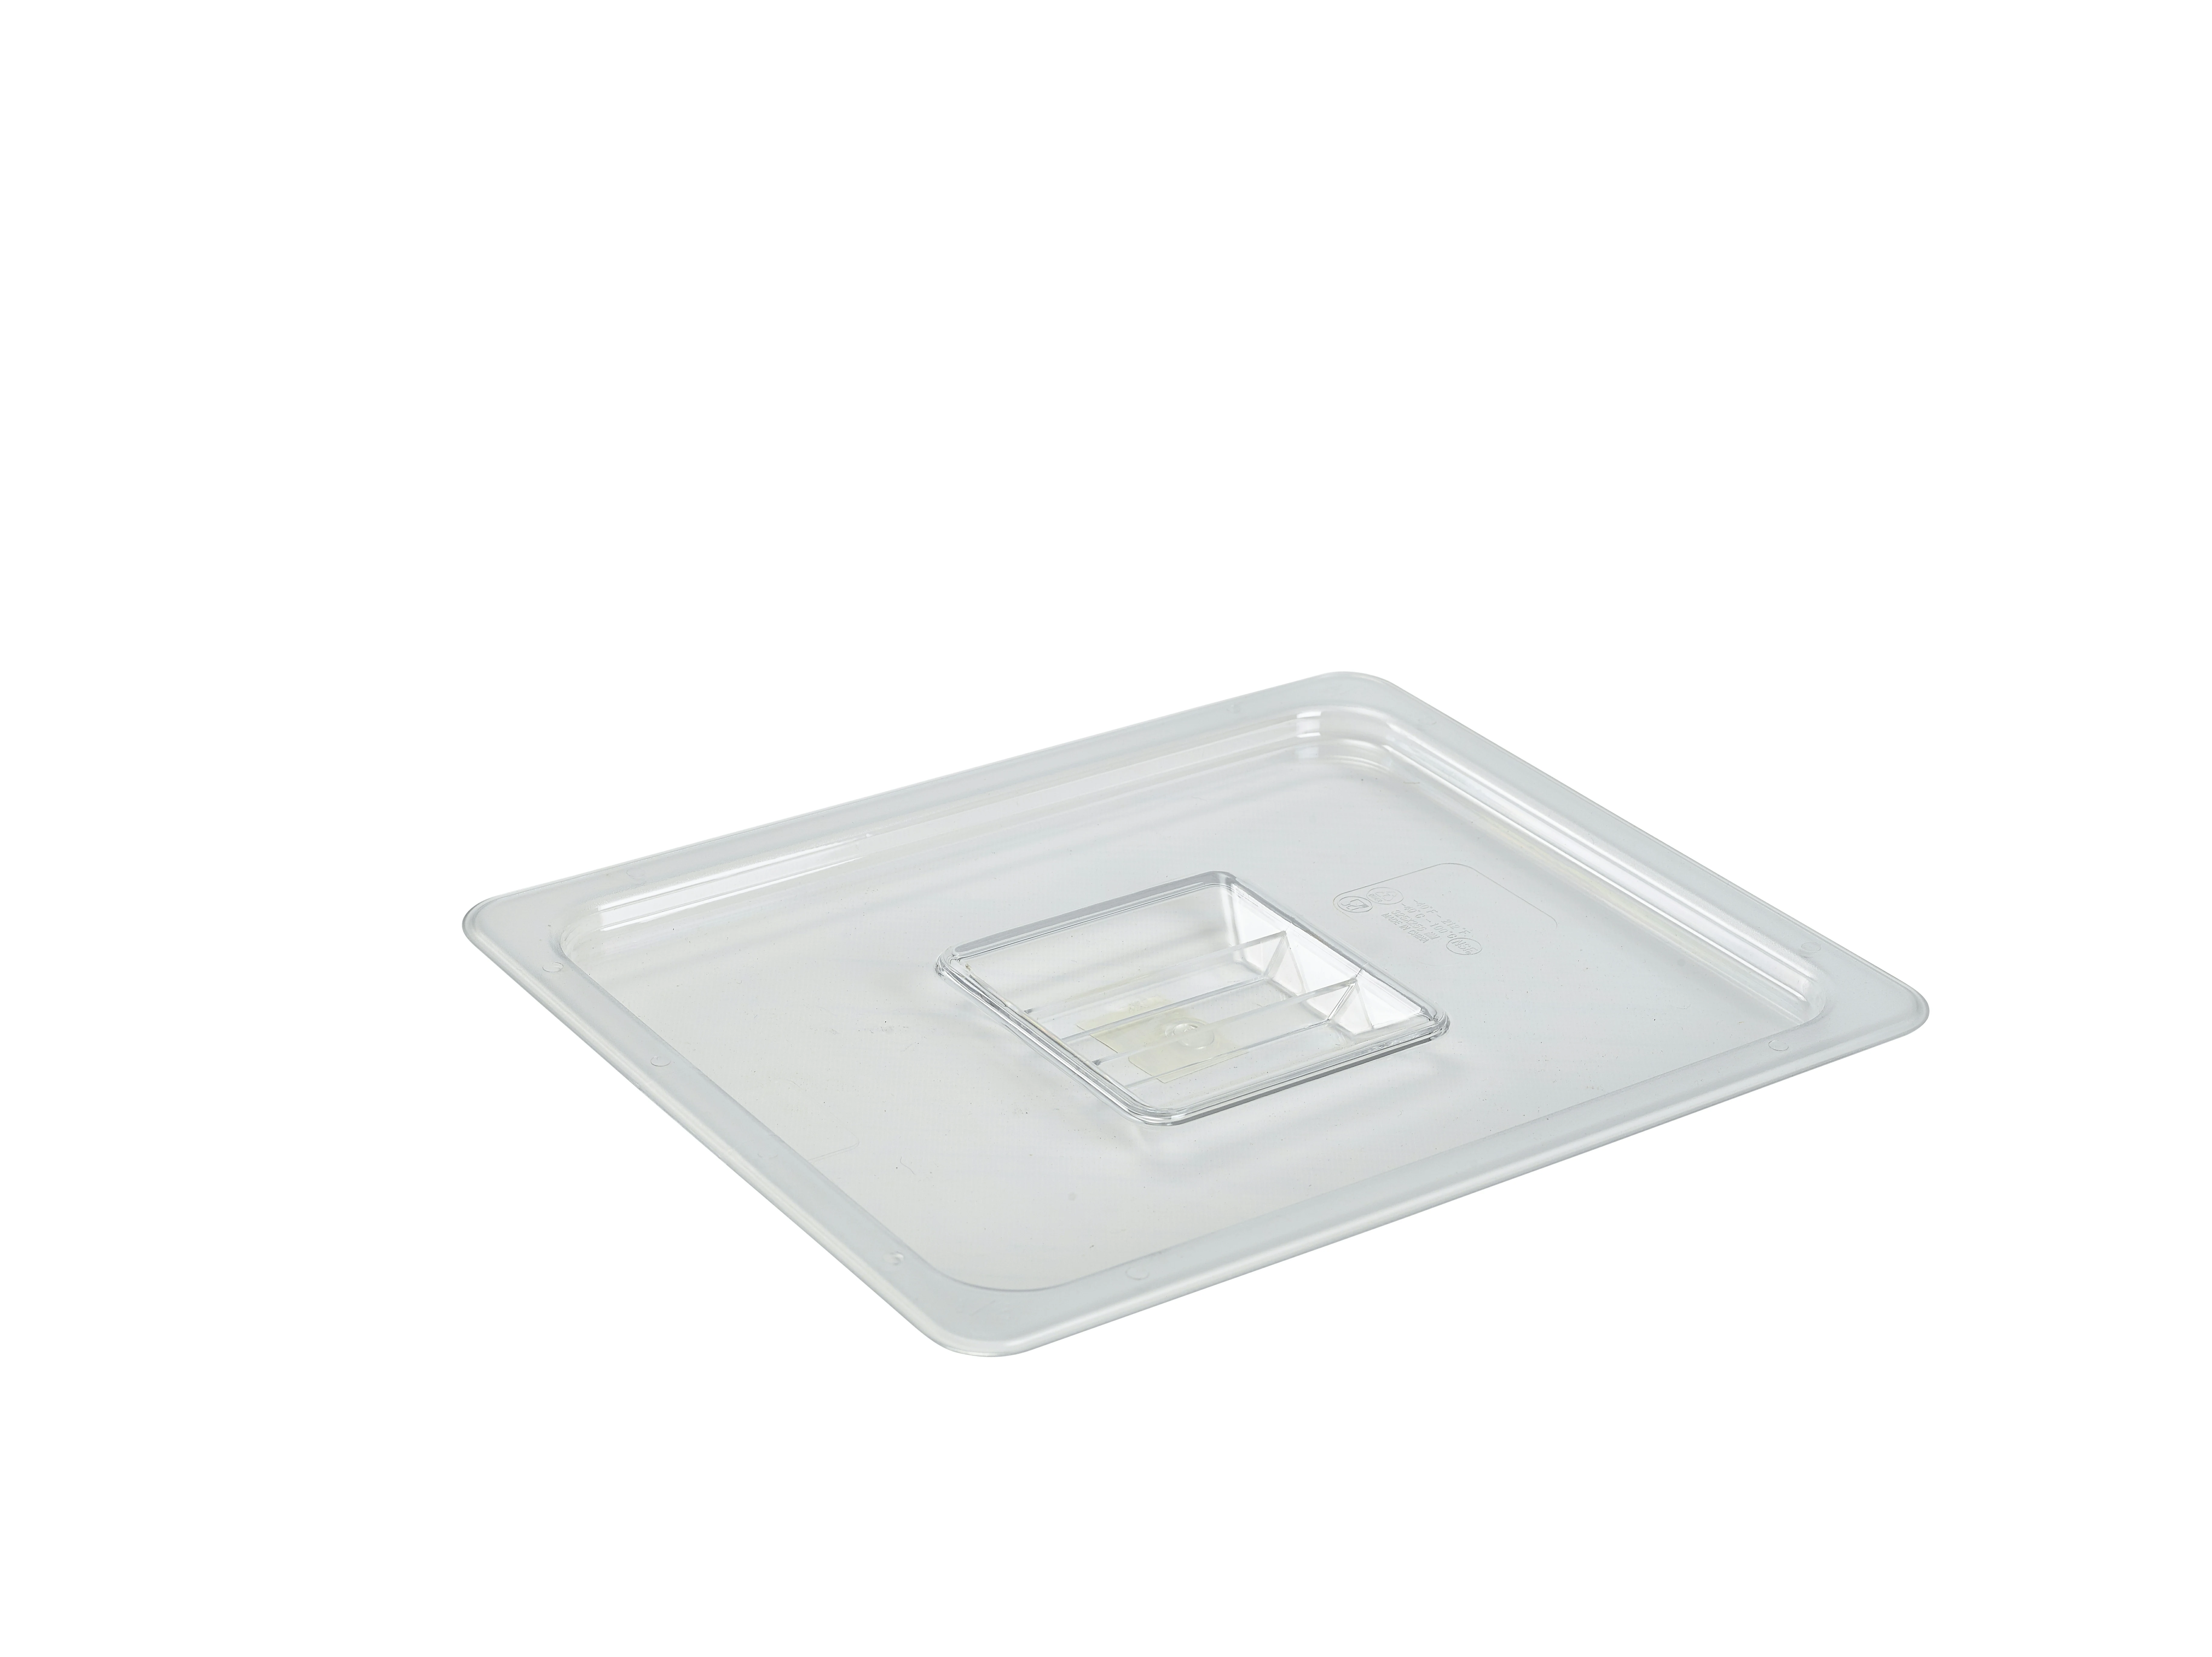 1/2 Polycarbonate GN Lid Clear